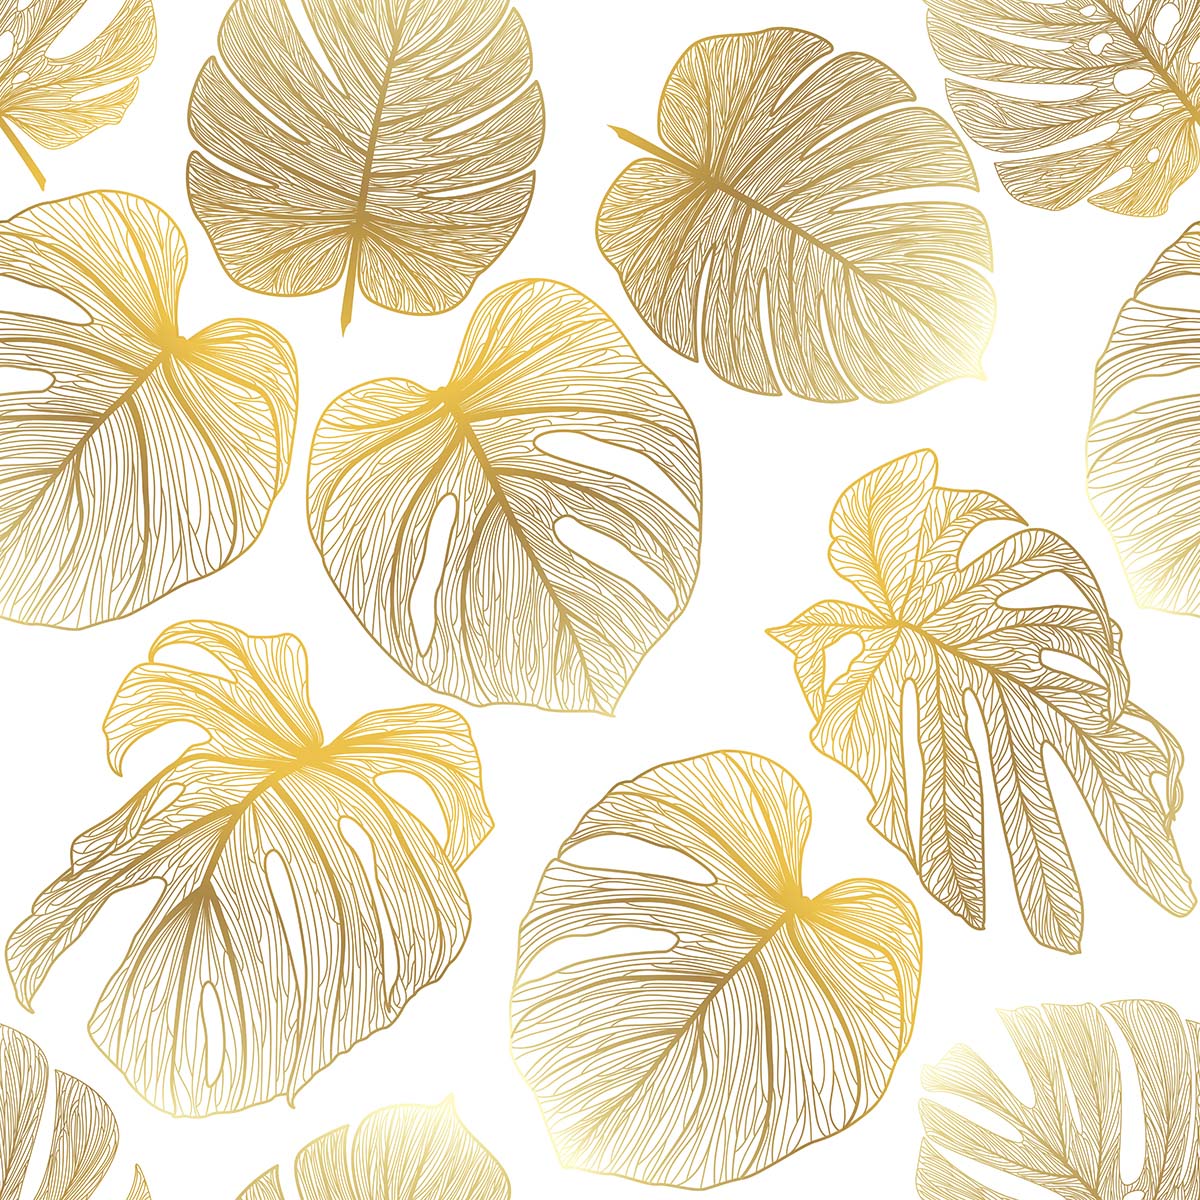 A pattern of gold leaves